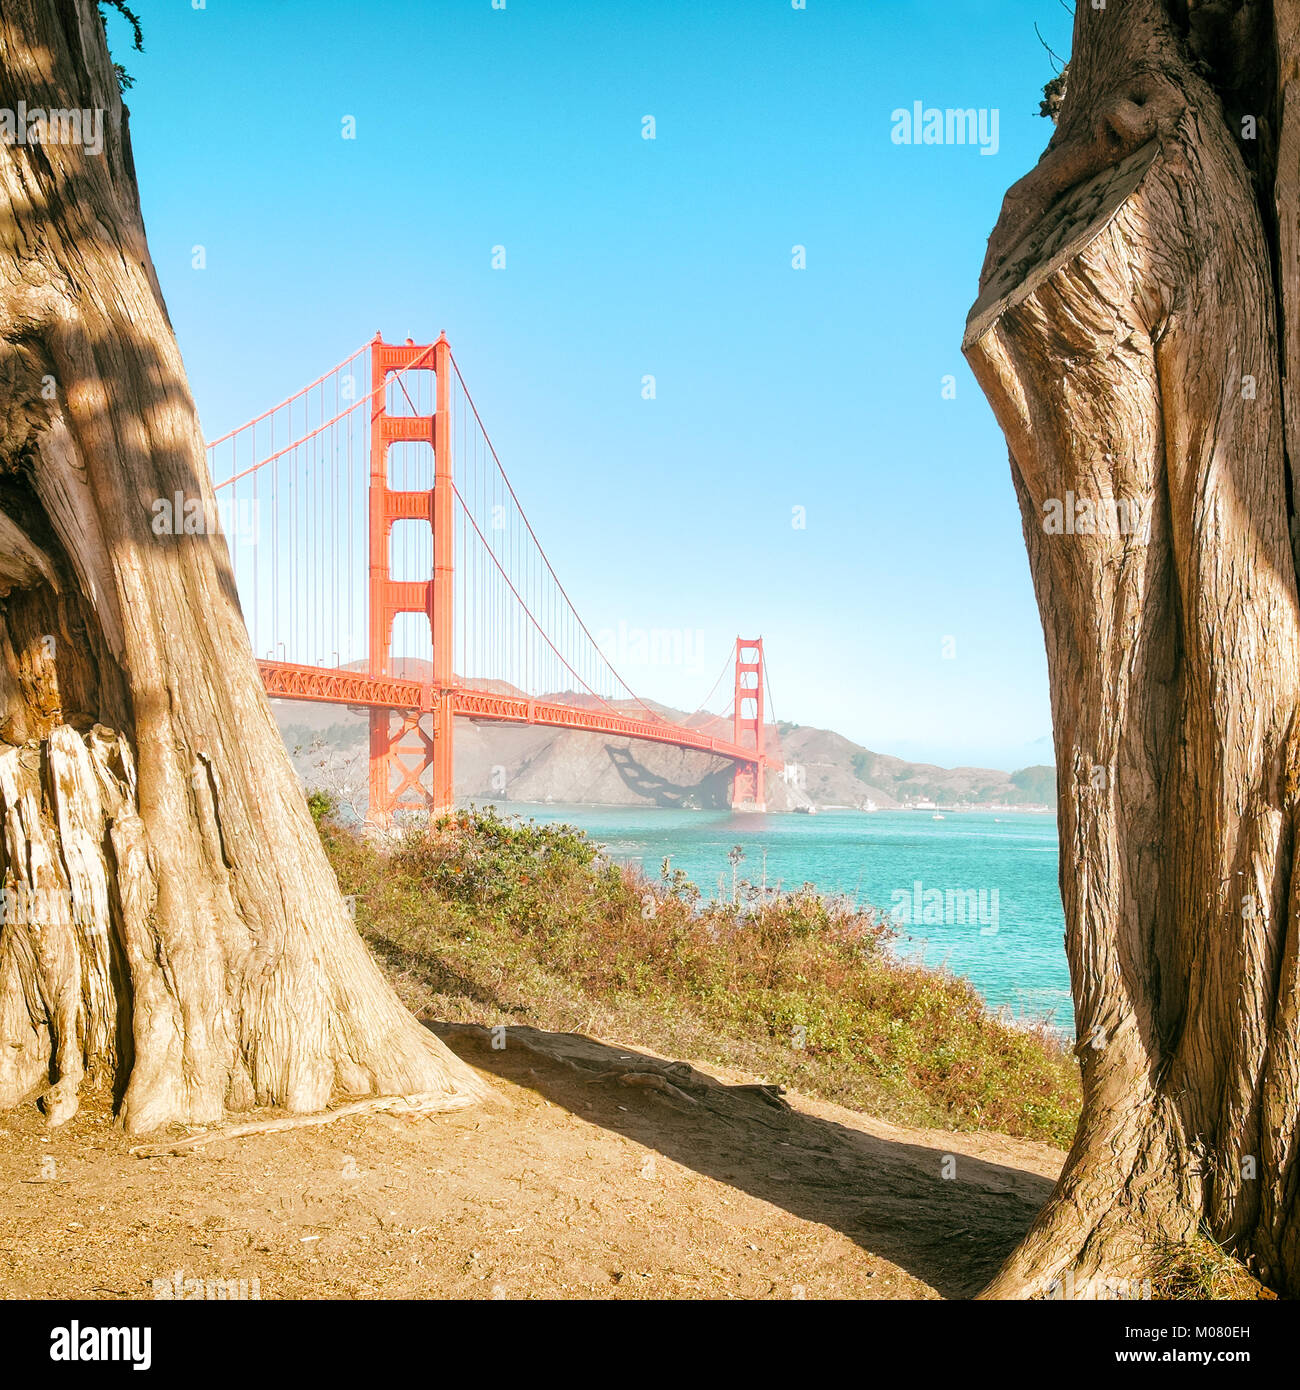 Golden Gate Bridge view framed by giant eucalyptus tree trunks. Sunny day, blue sky, vintage color. Square format. Stock Photo